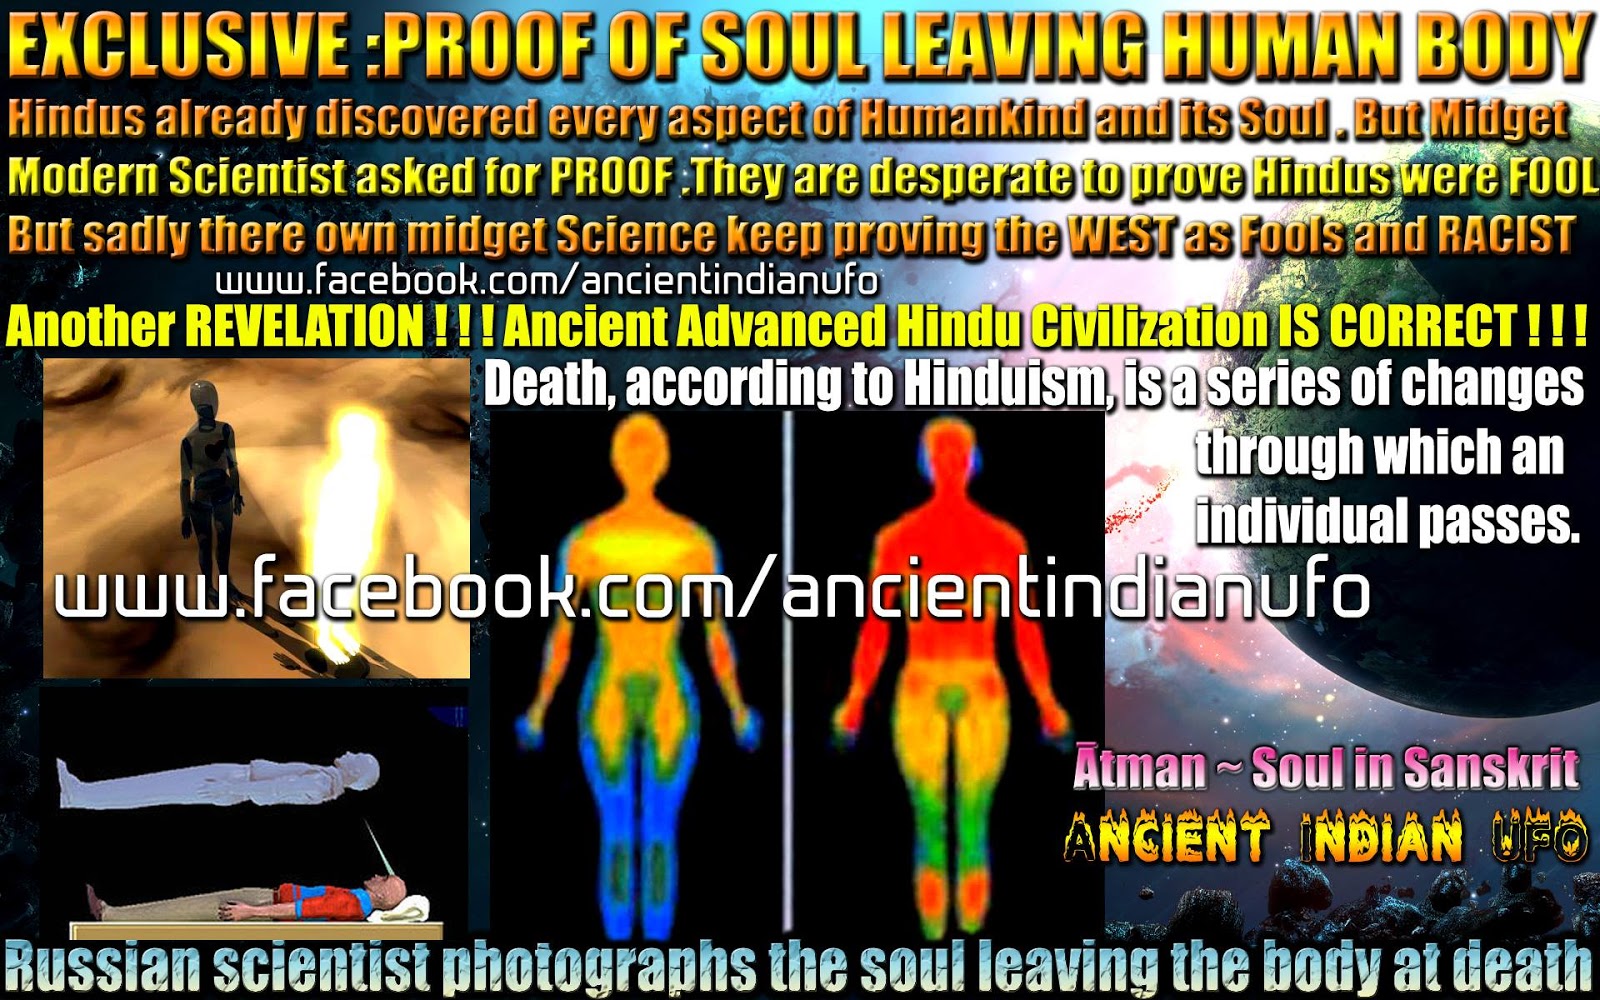 Is there scientific evidence of a soul